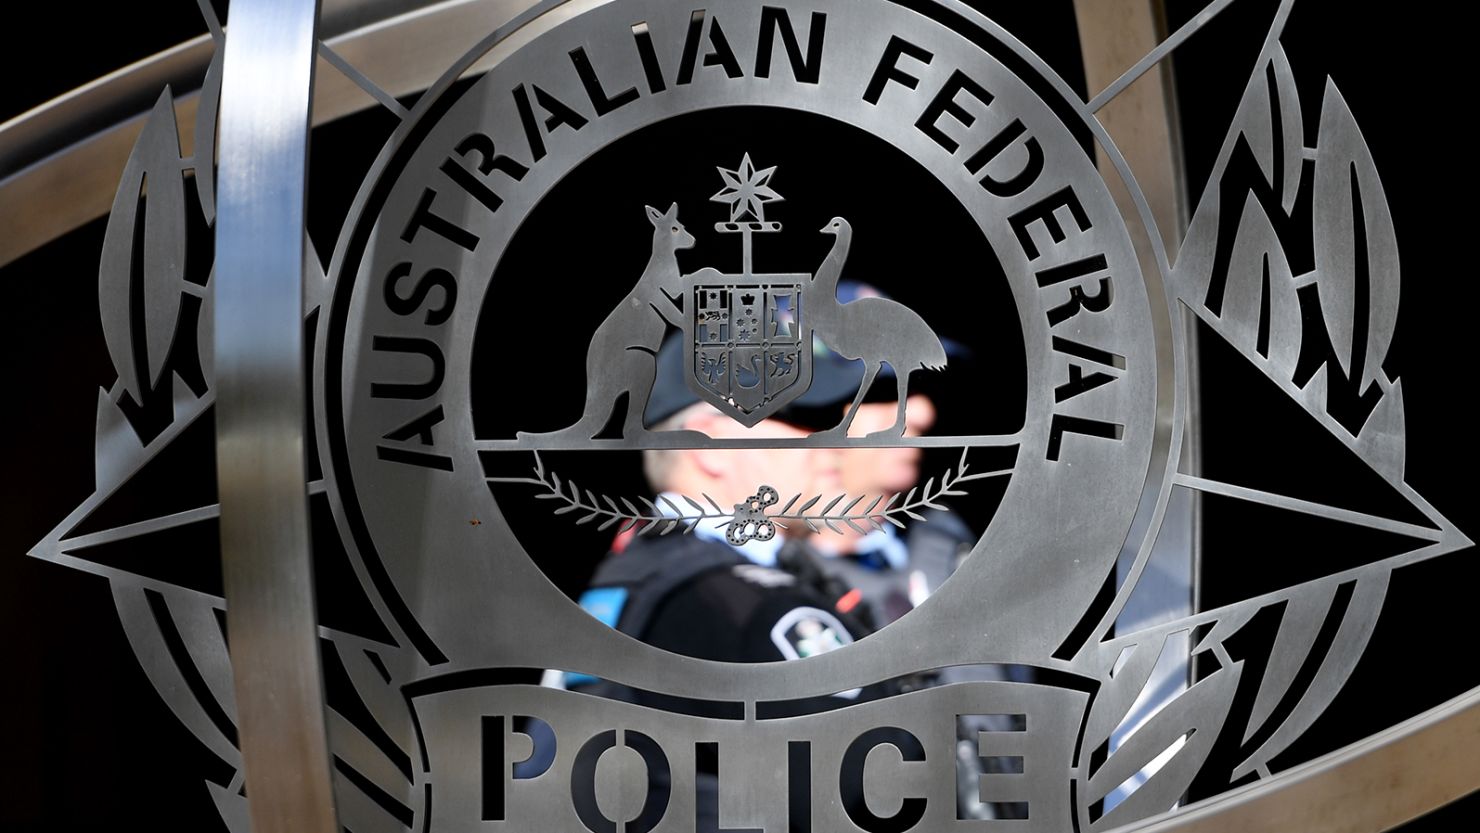 Australian Federal Police arrested Daniel Edmund Duggan, 54, on Friday in the rural town of Orange in New South Wales.